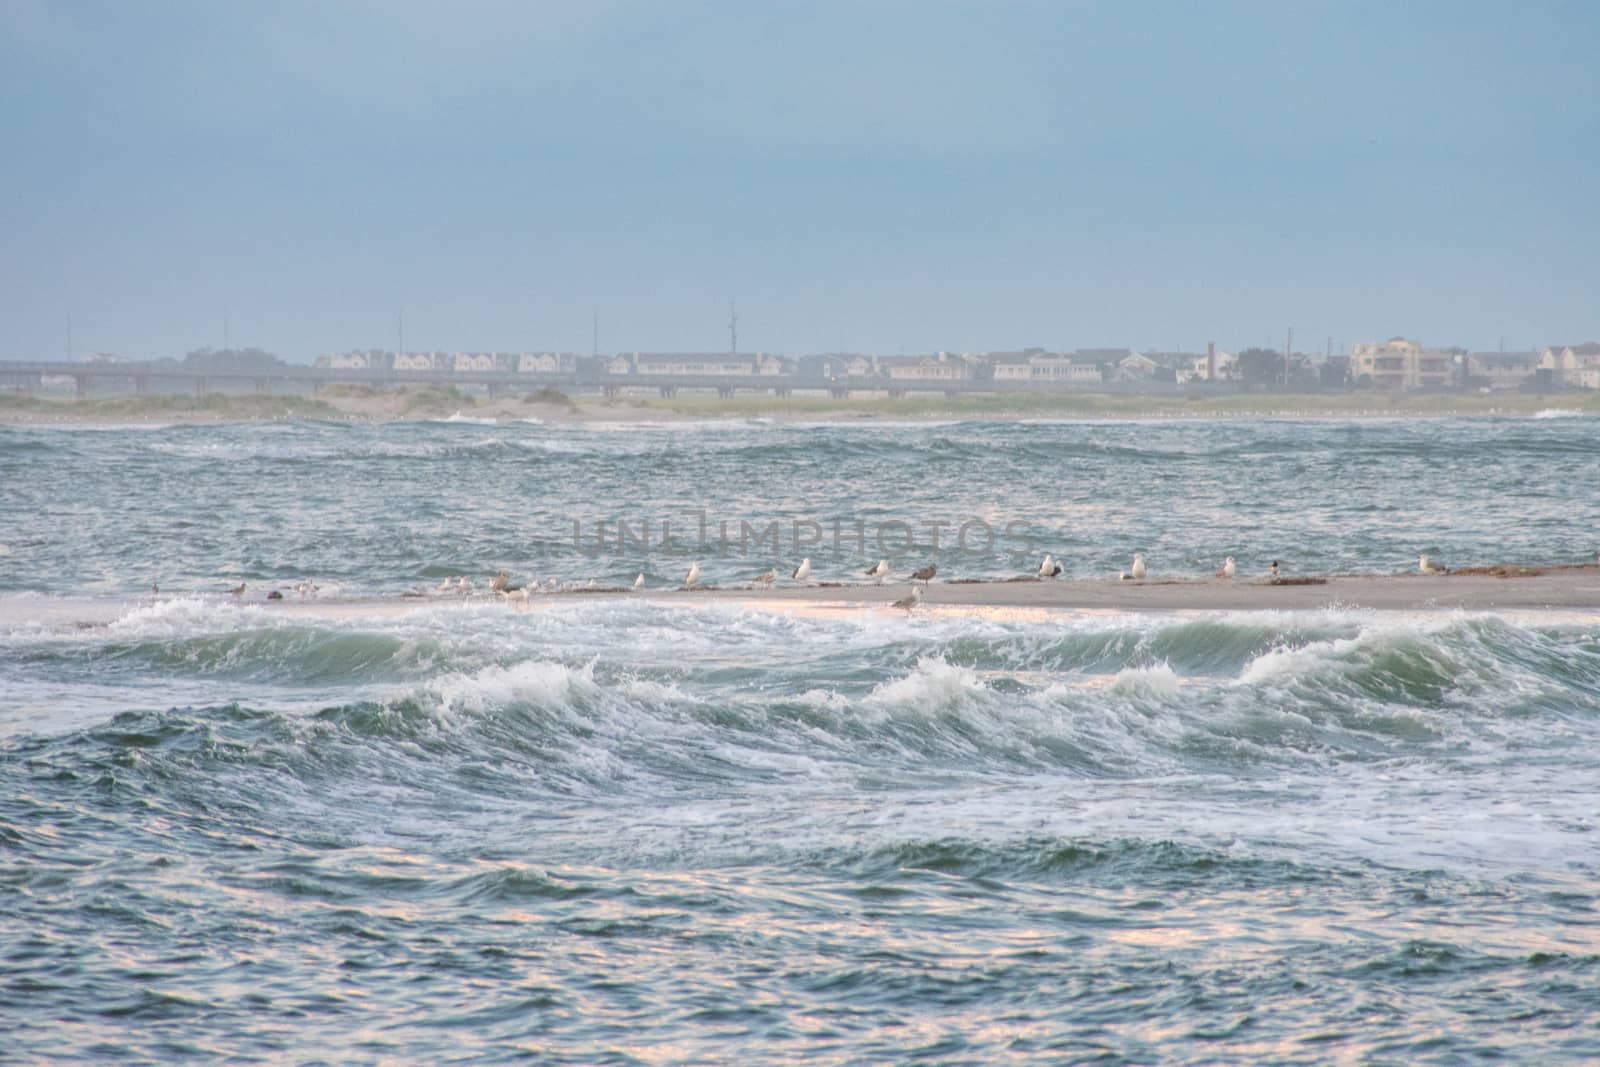 A Flock of Seagulls Standing on a Sand Dune in Rough Waters by bju12290